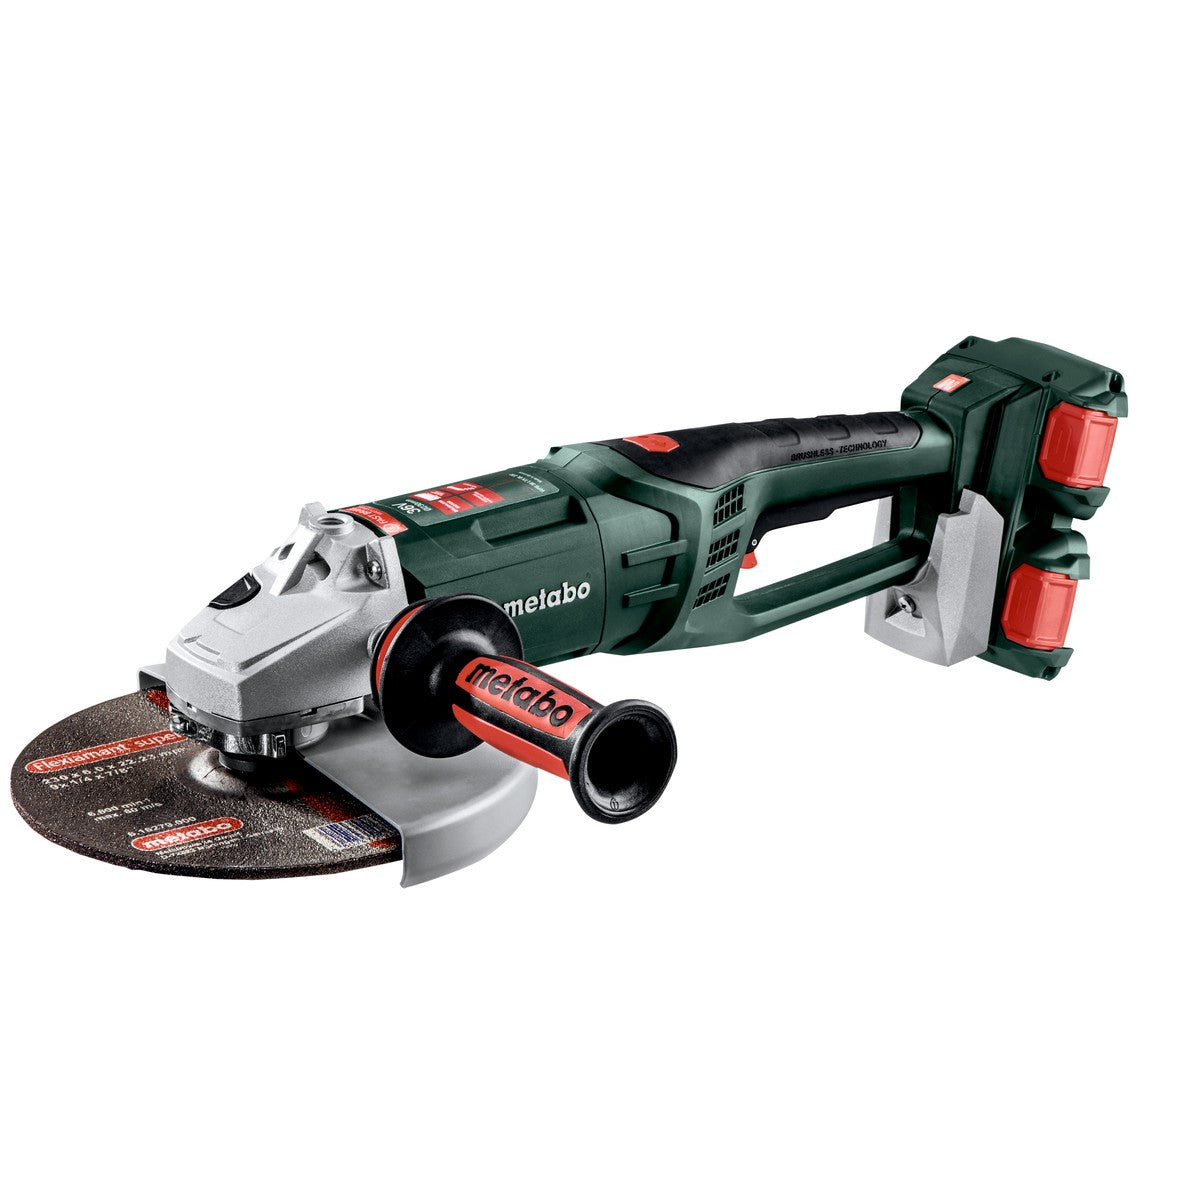 Metabo (613102860) 9 inch 18V Cordless Angle Grinder Bare Tool image 1 of 3